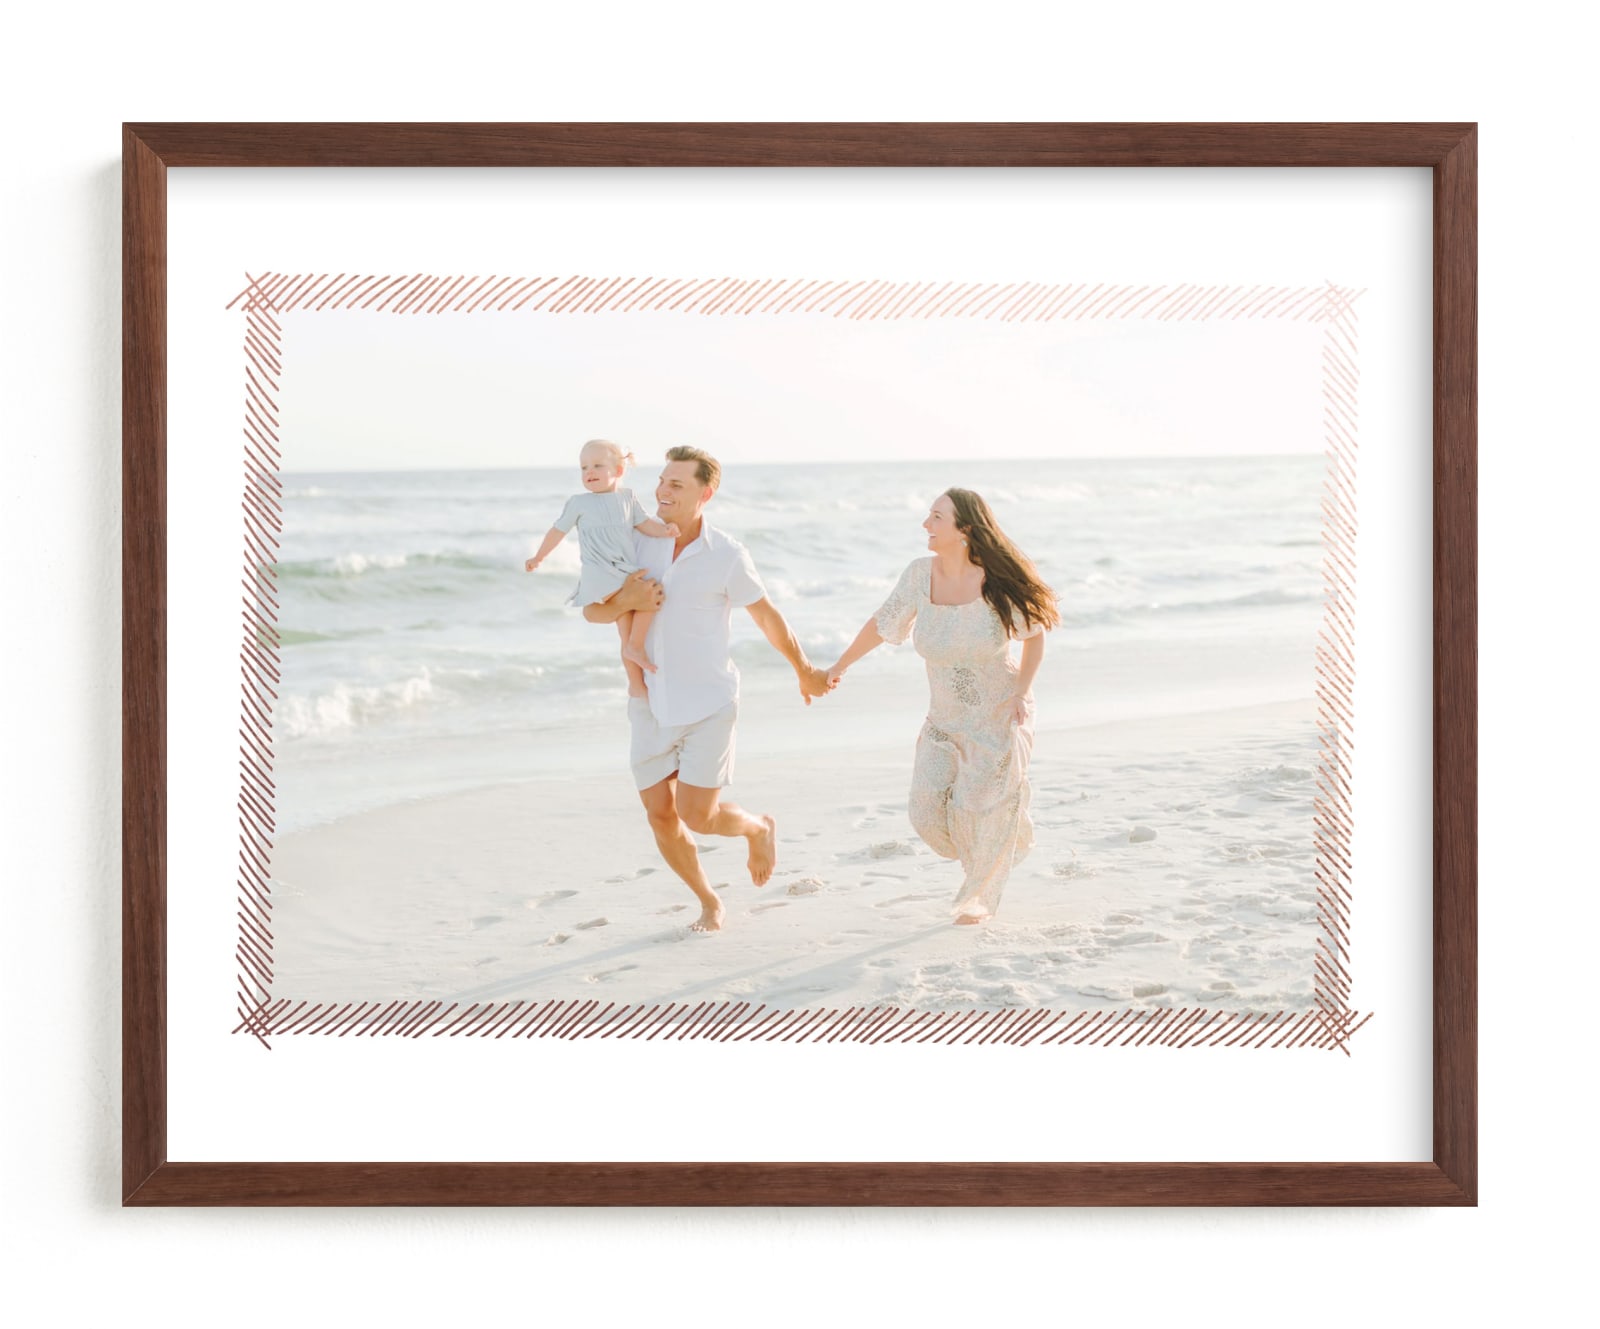 This is a rosegold foil stamped photo art by June Letters Studio called Hand Sketched Frame.